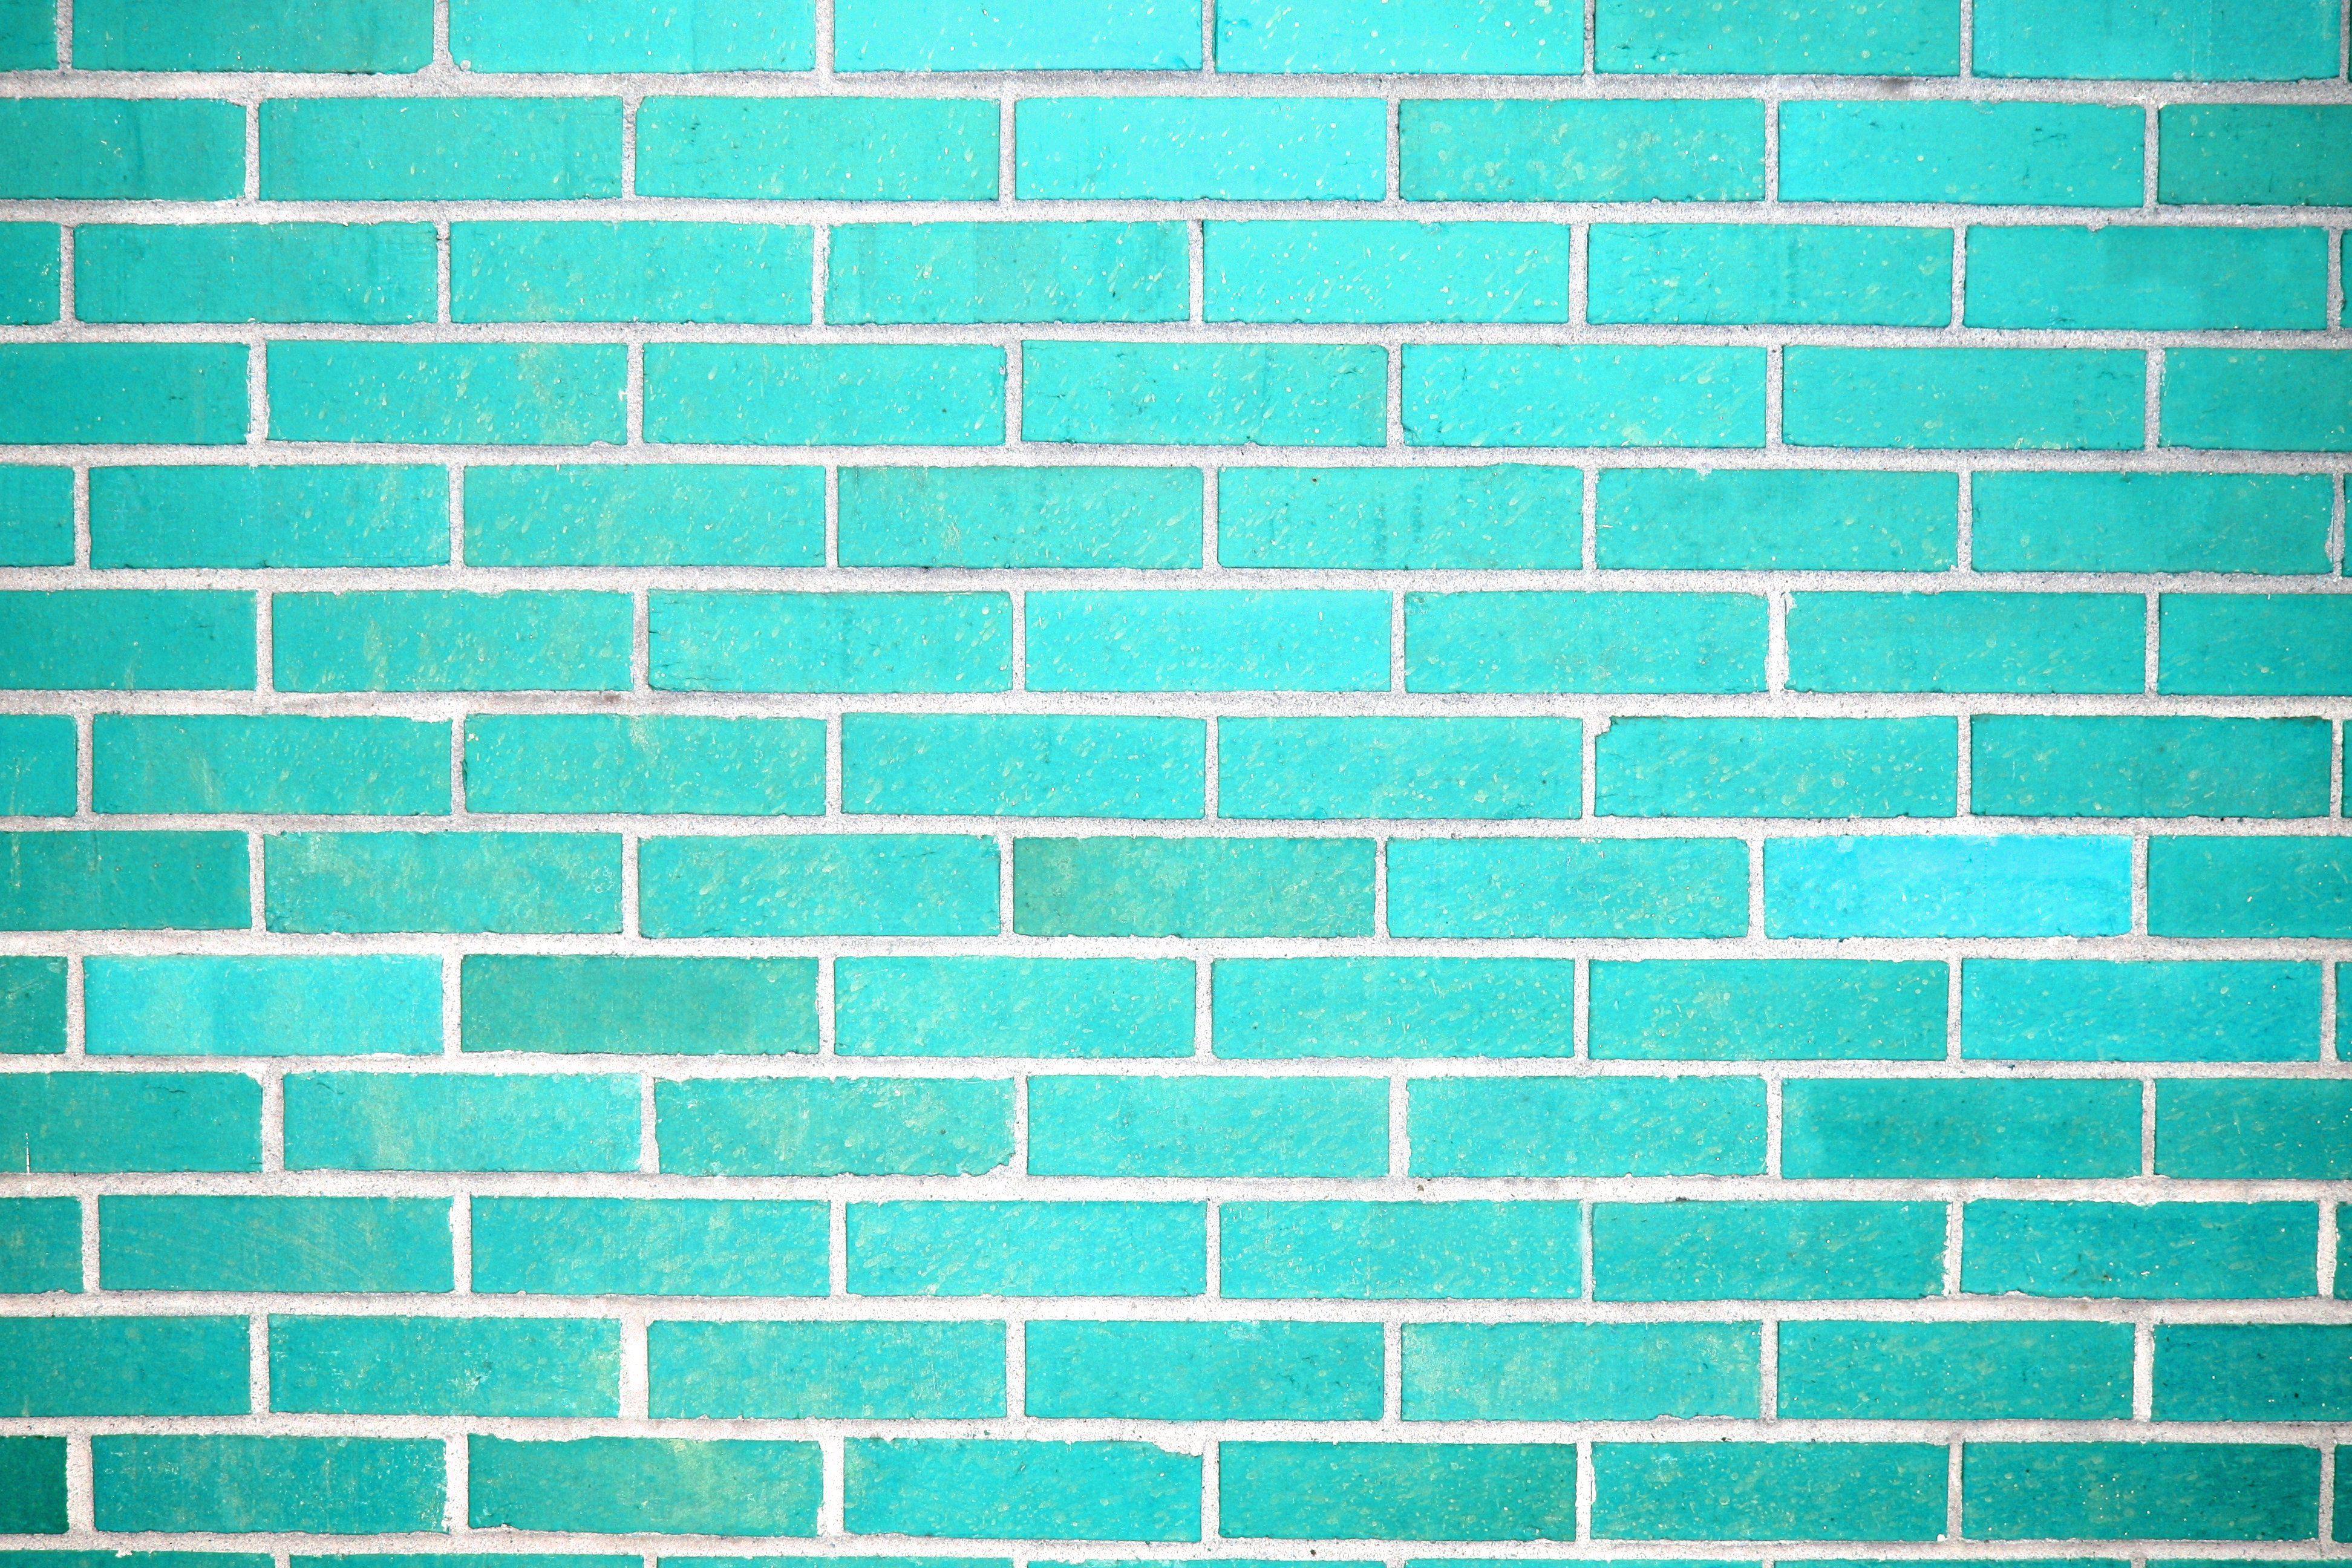 Teal Brick Wall Texture Picture. Free Photograph. Photo Public Domain